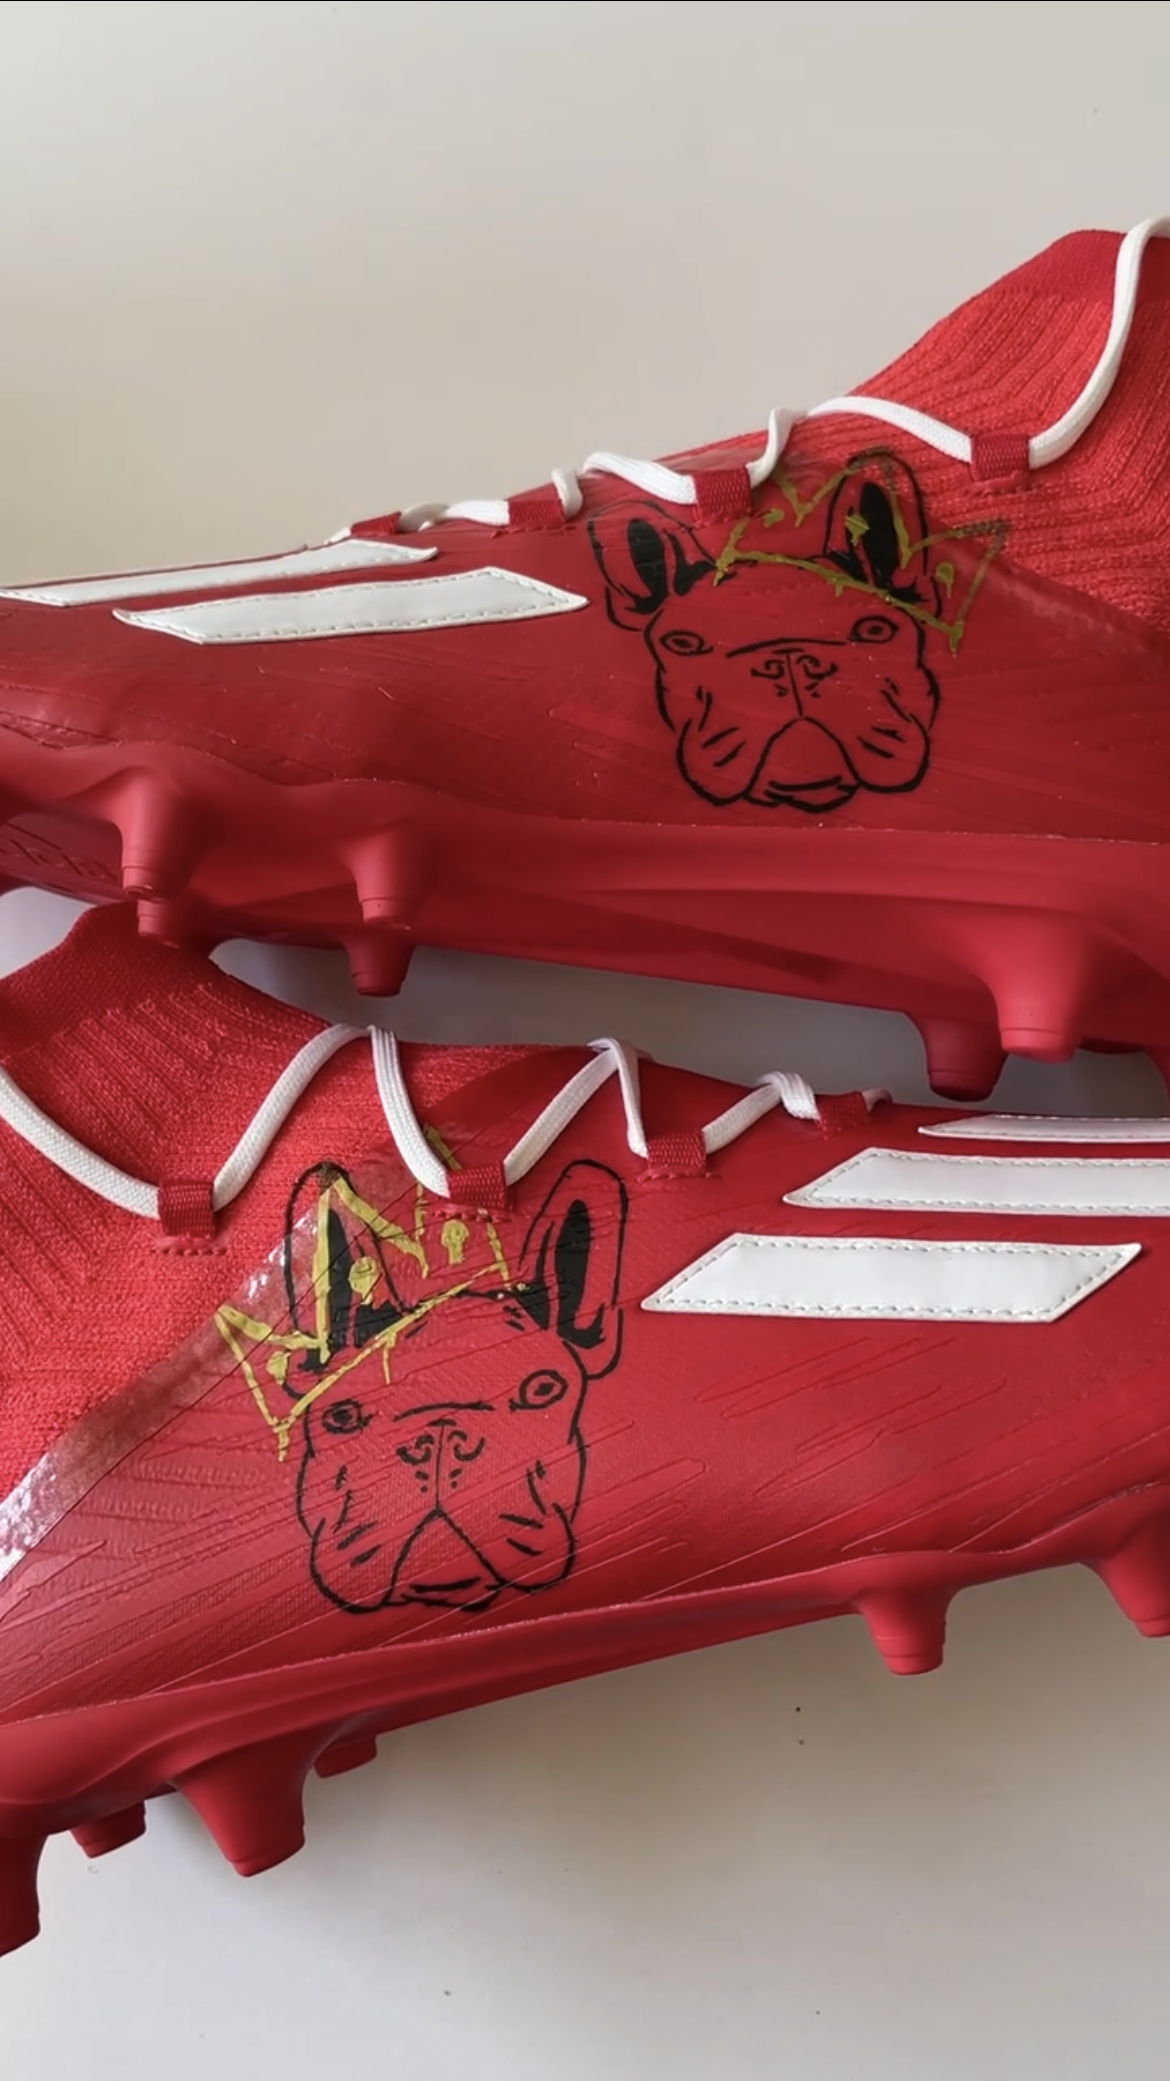 Nike Celebrates Its Top-Rated Madden Players With Custom Cleats